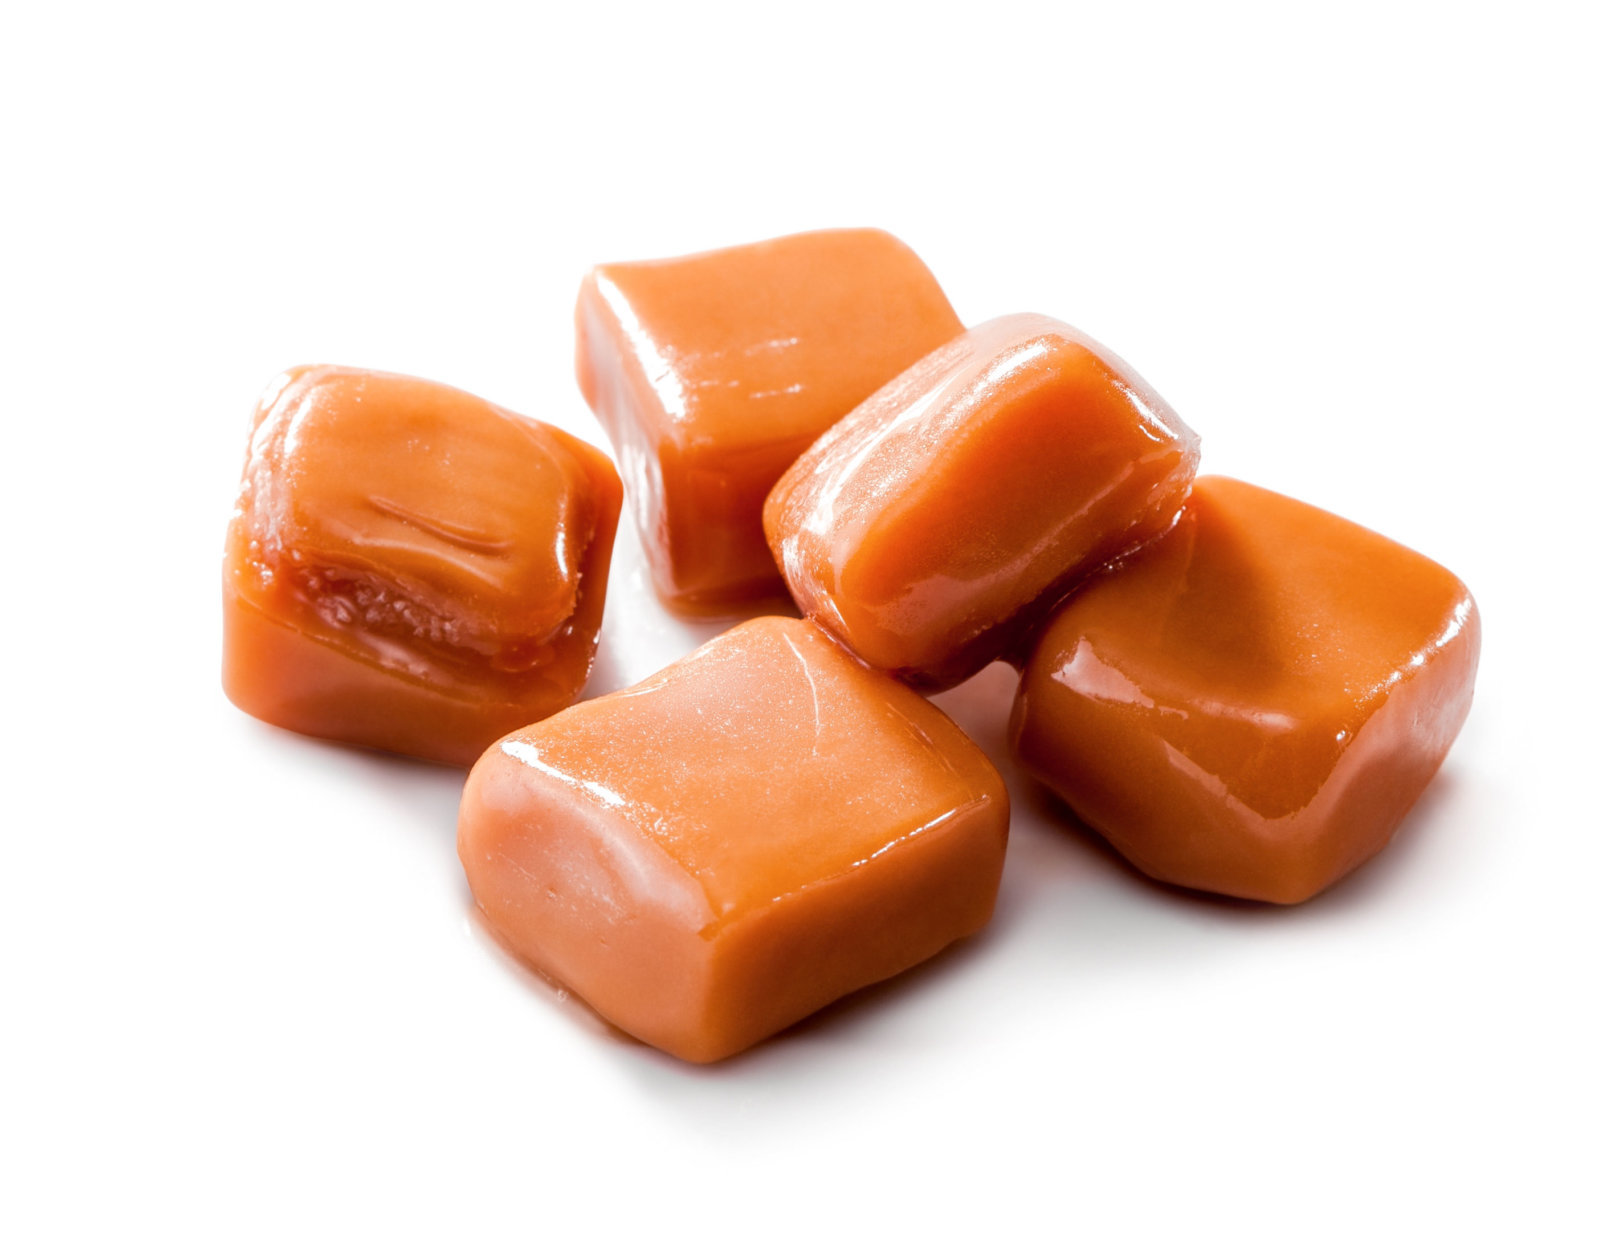 slightly melted toffee caramel candy close-up isolated (with clipping path) on white background